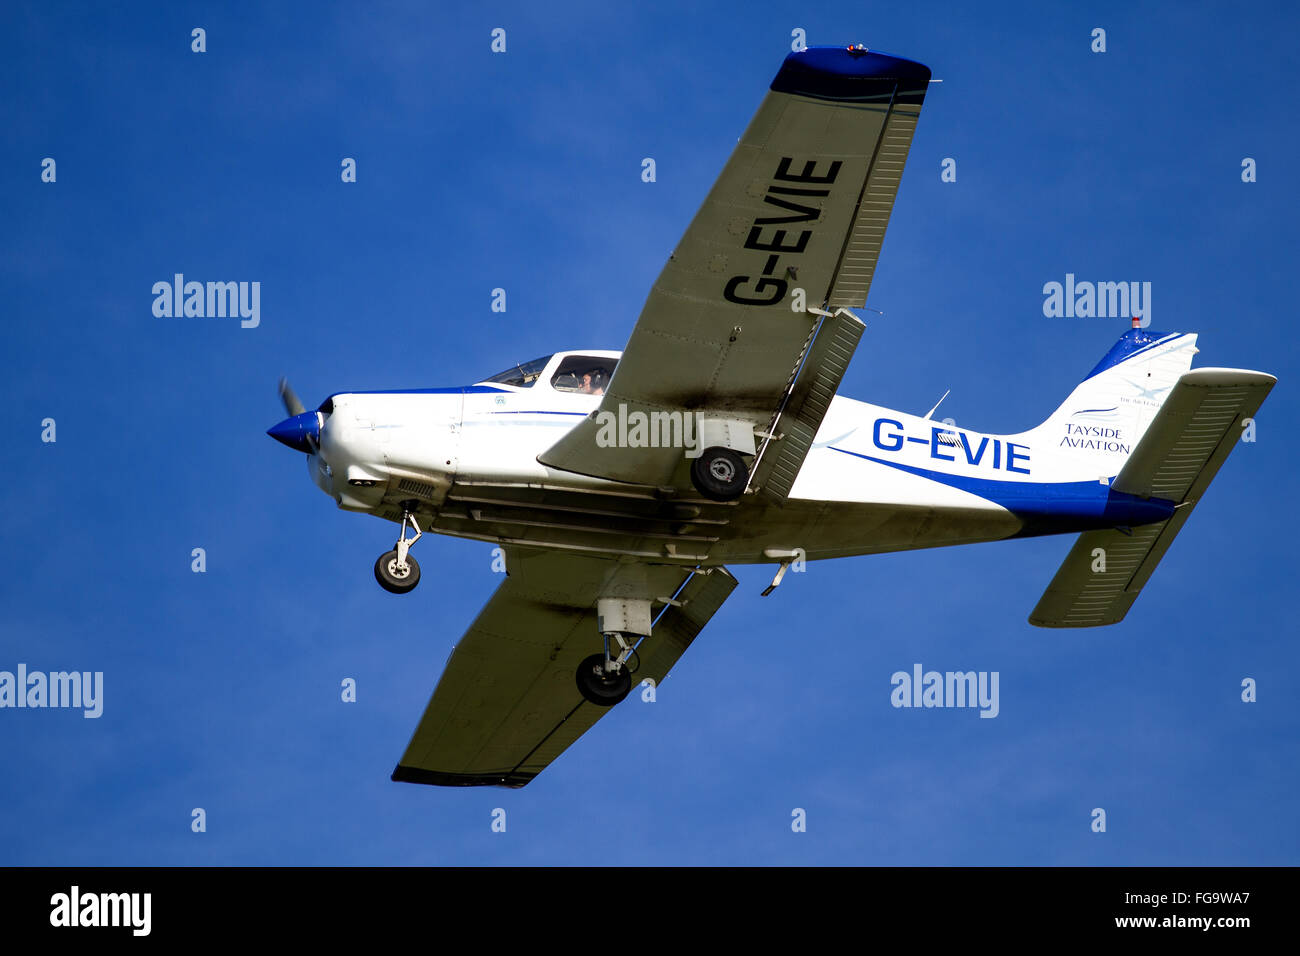 Tayside Aviation Piper PA-28 Warrior G-EVIE light aircraft flying overhead while preparing to land at the airport in Dundee, UK Stock Photo